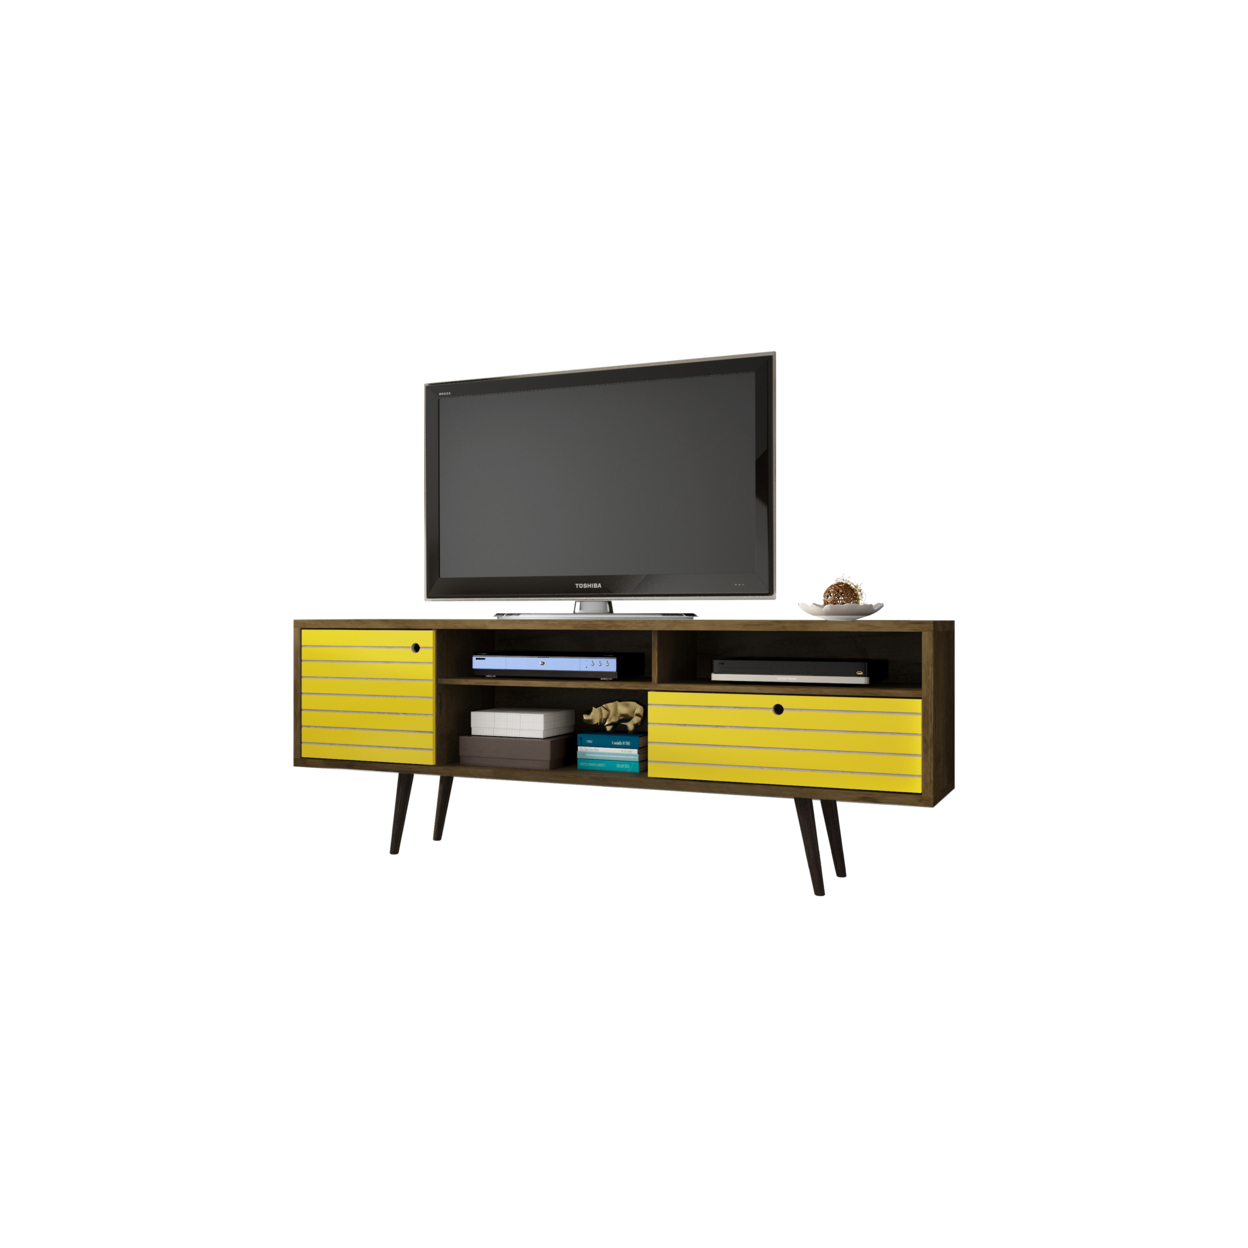 70.86" Mid Century - Modern TV Stand with 4 Shelving Spaces & 1 Drawer